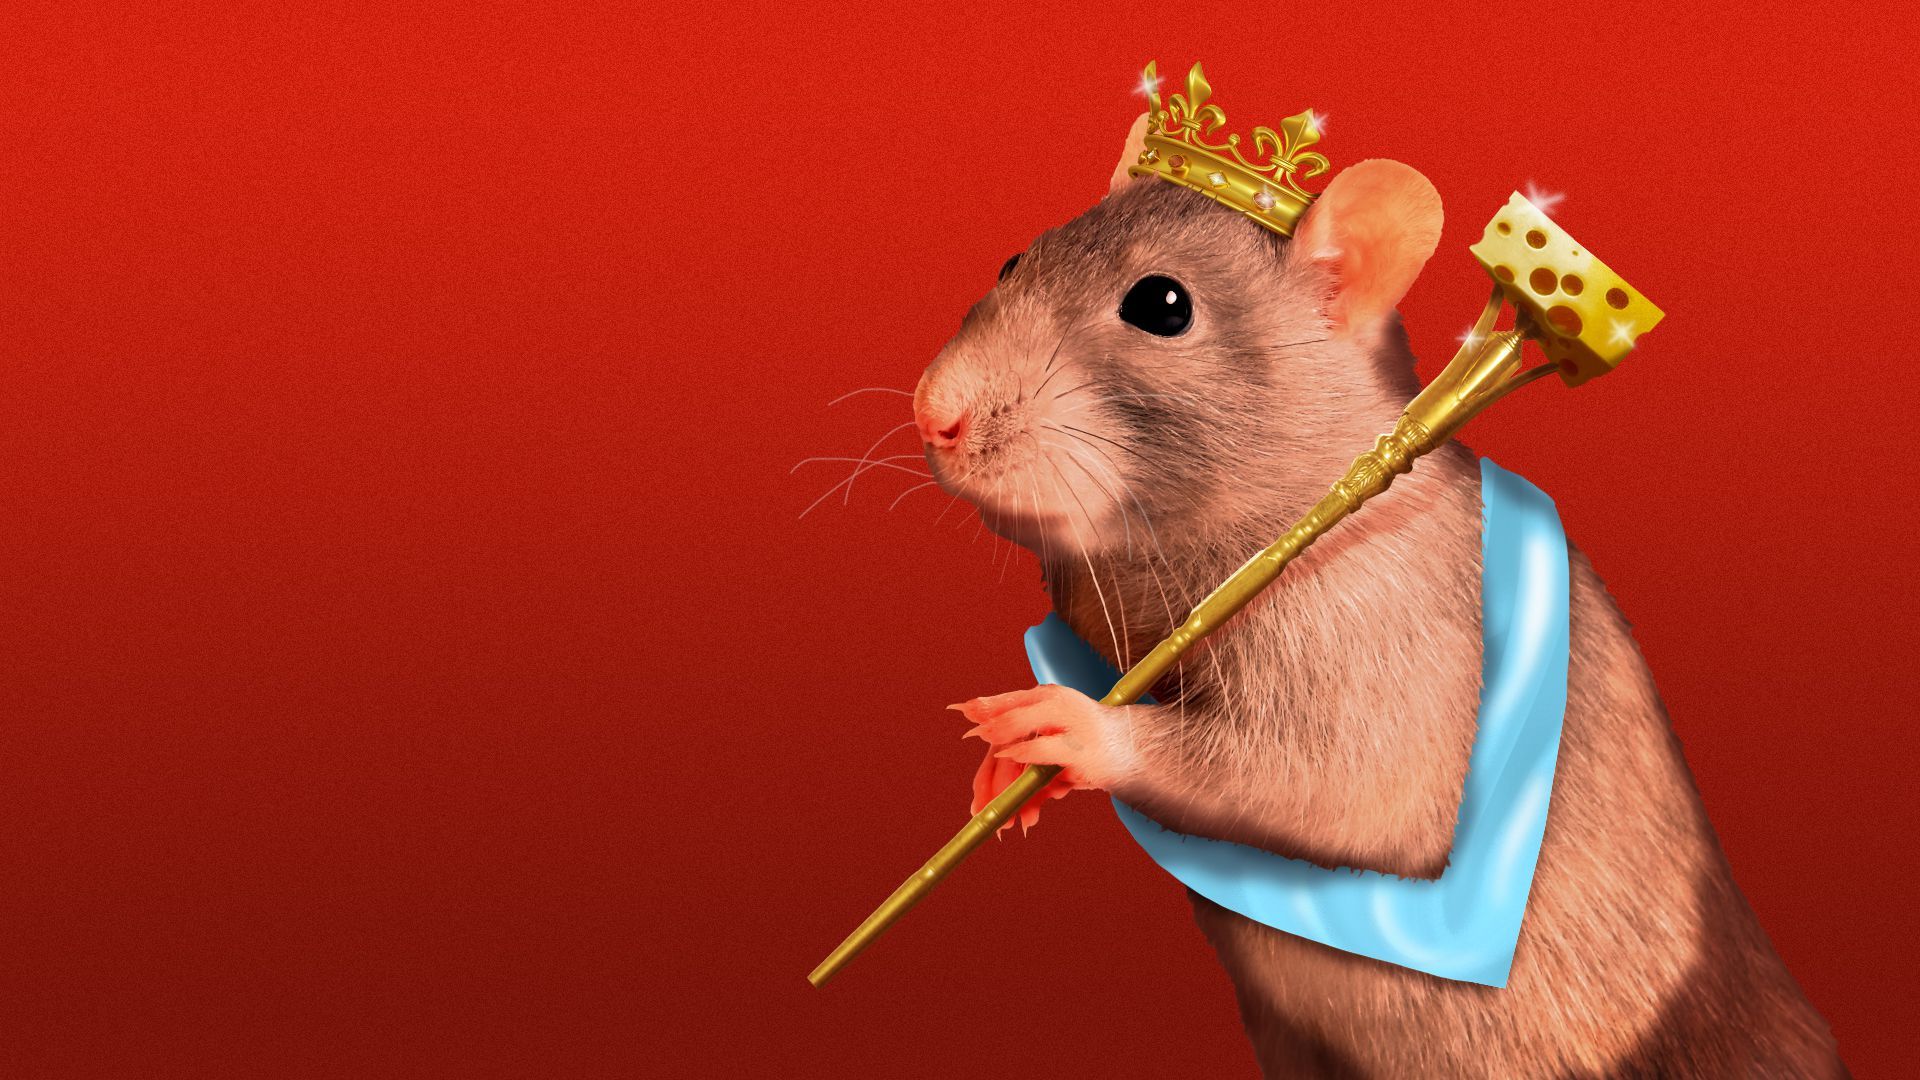 Illustration of a rat with a cheese scepter, crown, and sash